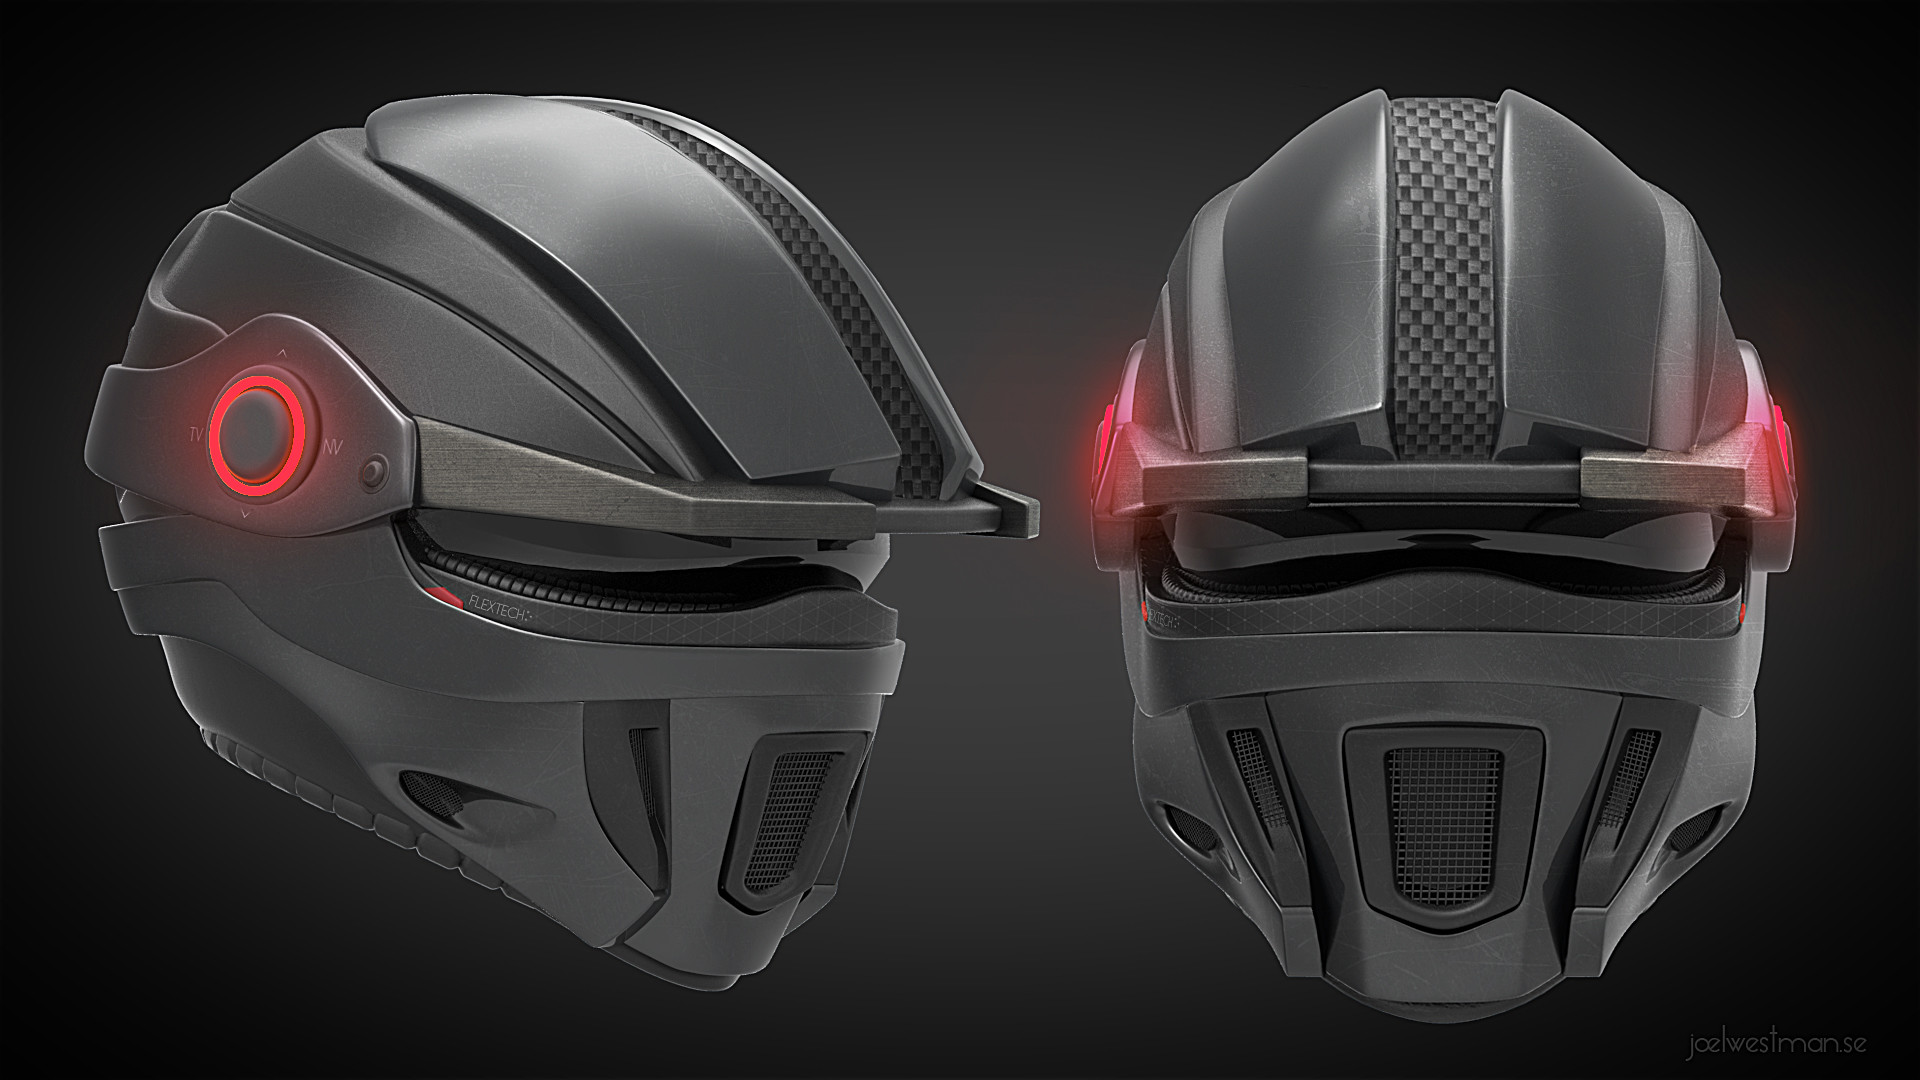 Top 10 Coolest Helmet Concepts on Artstation that could be Motorcycle Helmets